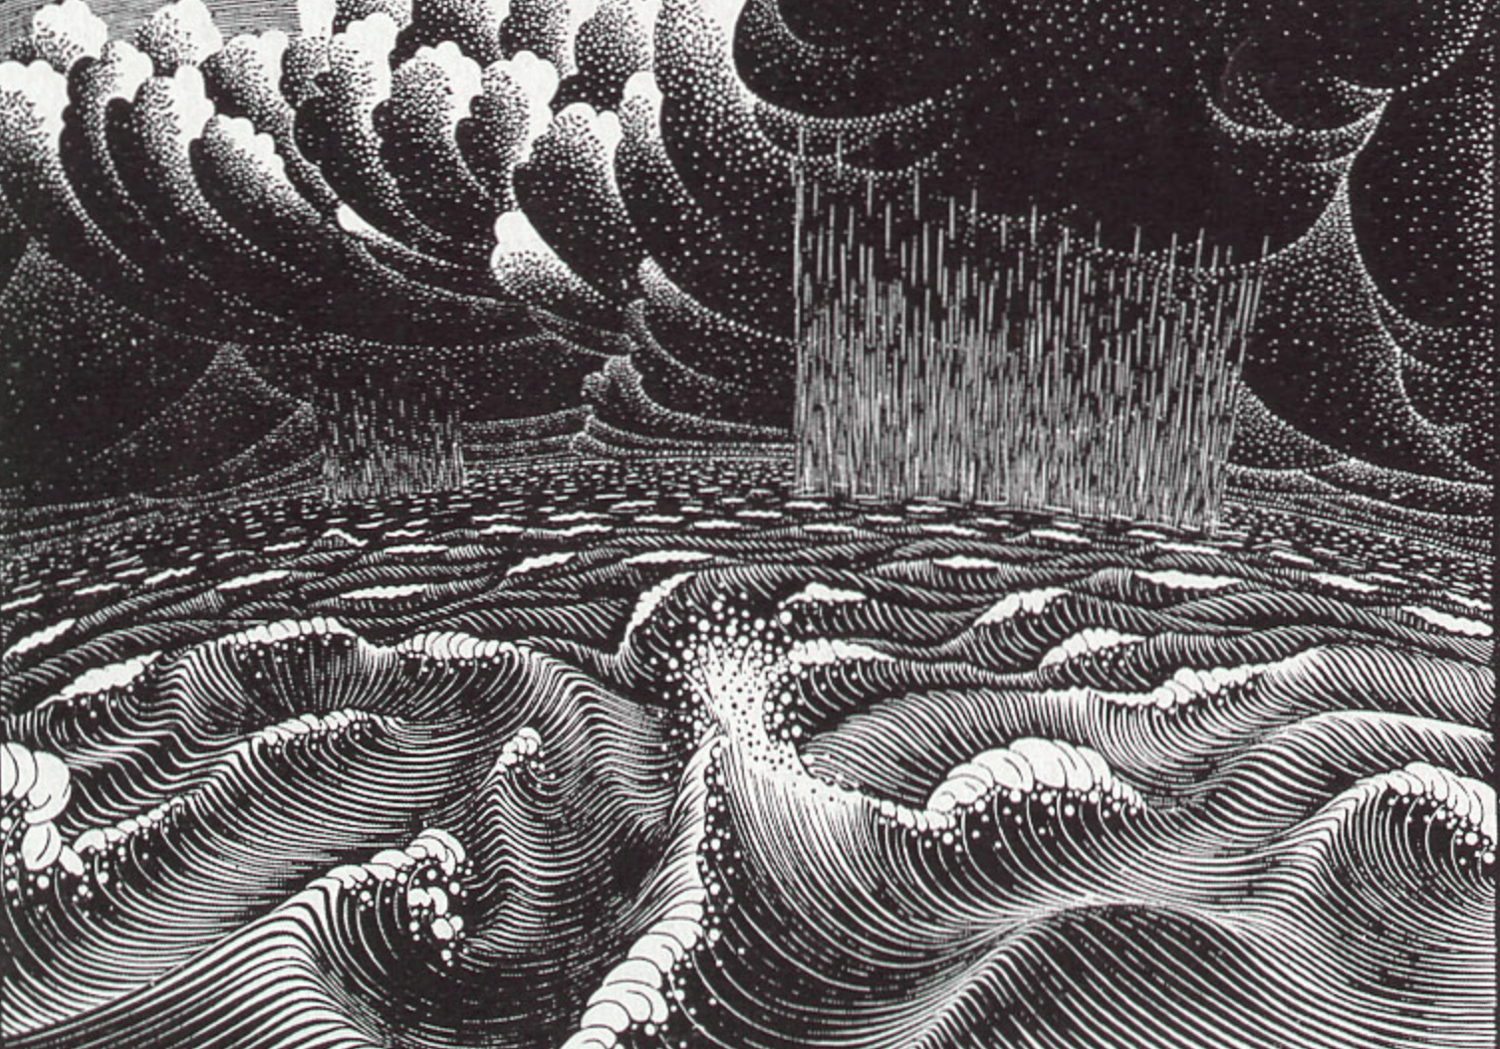 Artwork: The 2nd Day of Creation by M.C. Escher is a black and white line drawing depicting a turbulant sea with rain and storm clouds above.